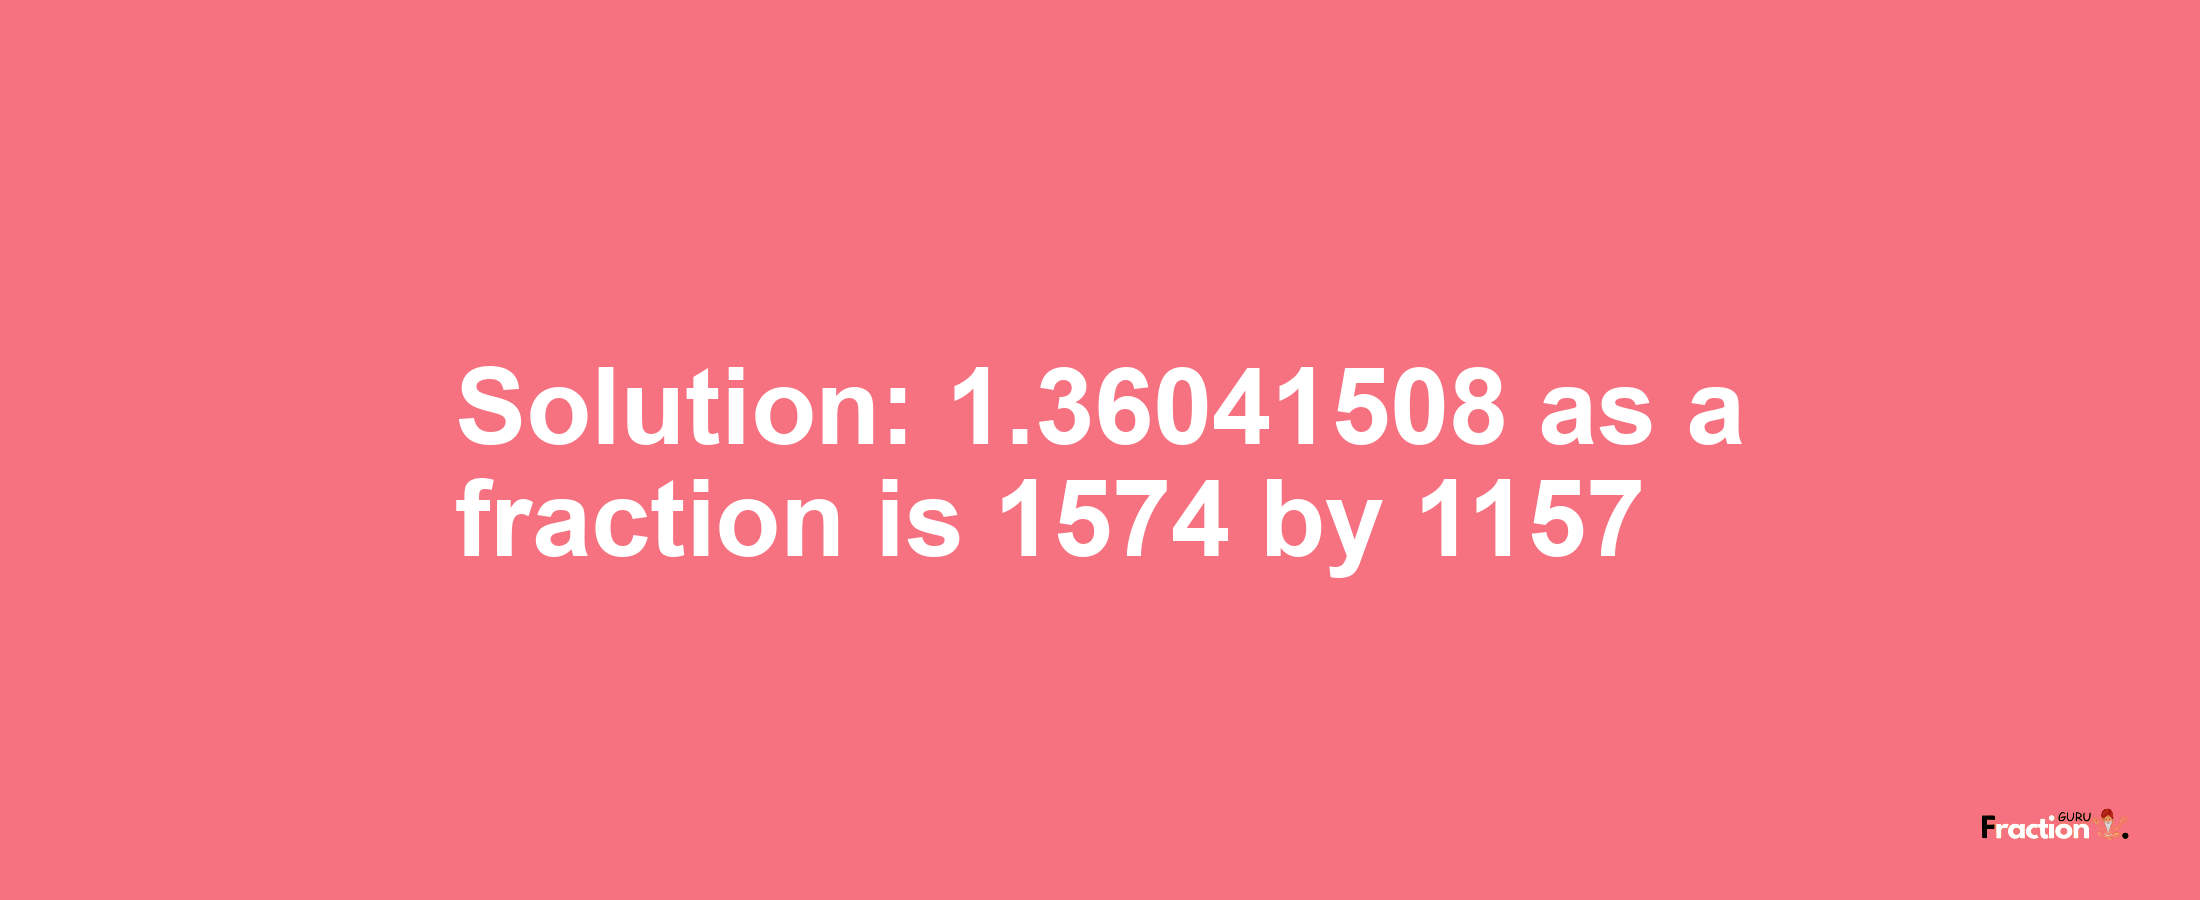 Solution:1.36041508 as a fraction is 1574/1157